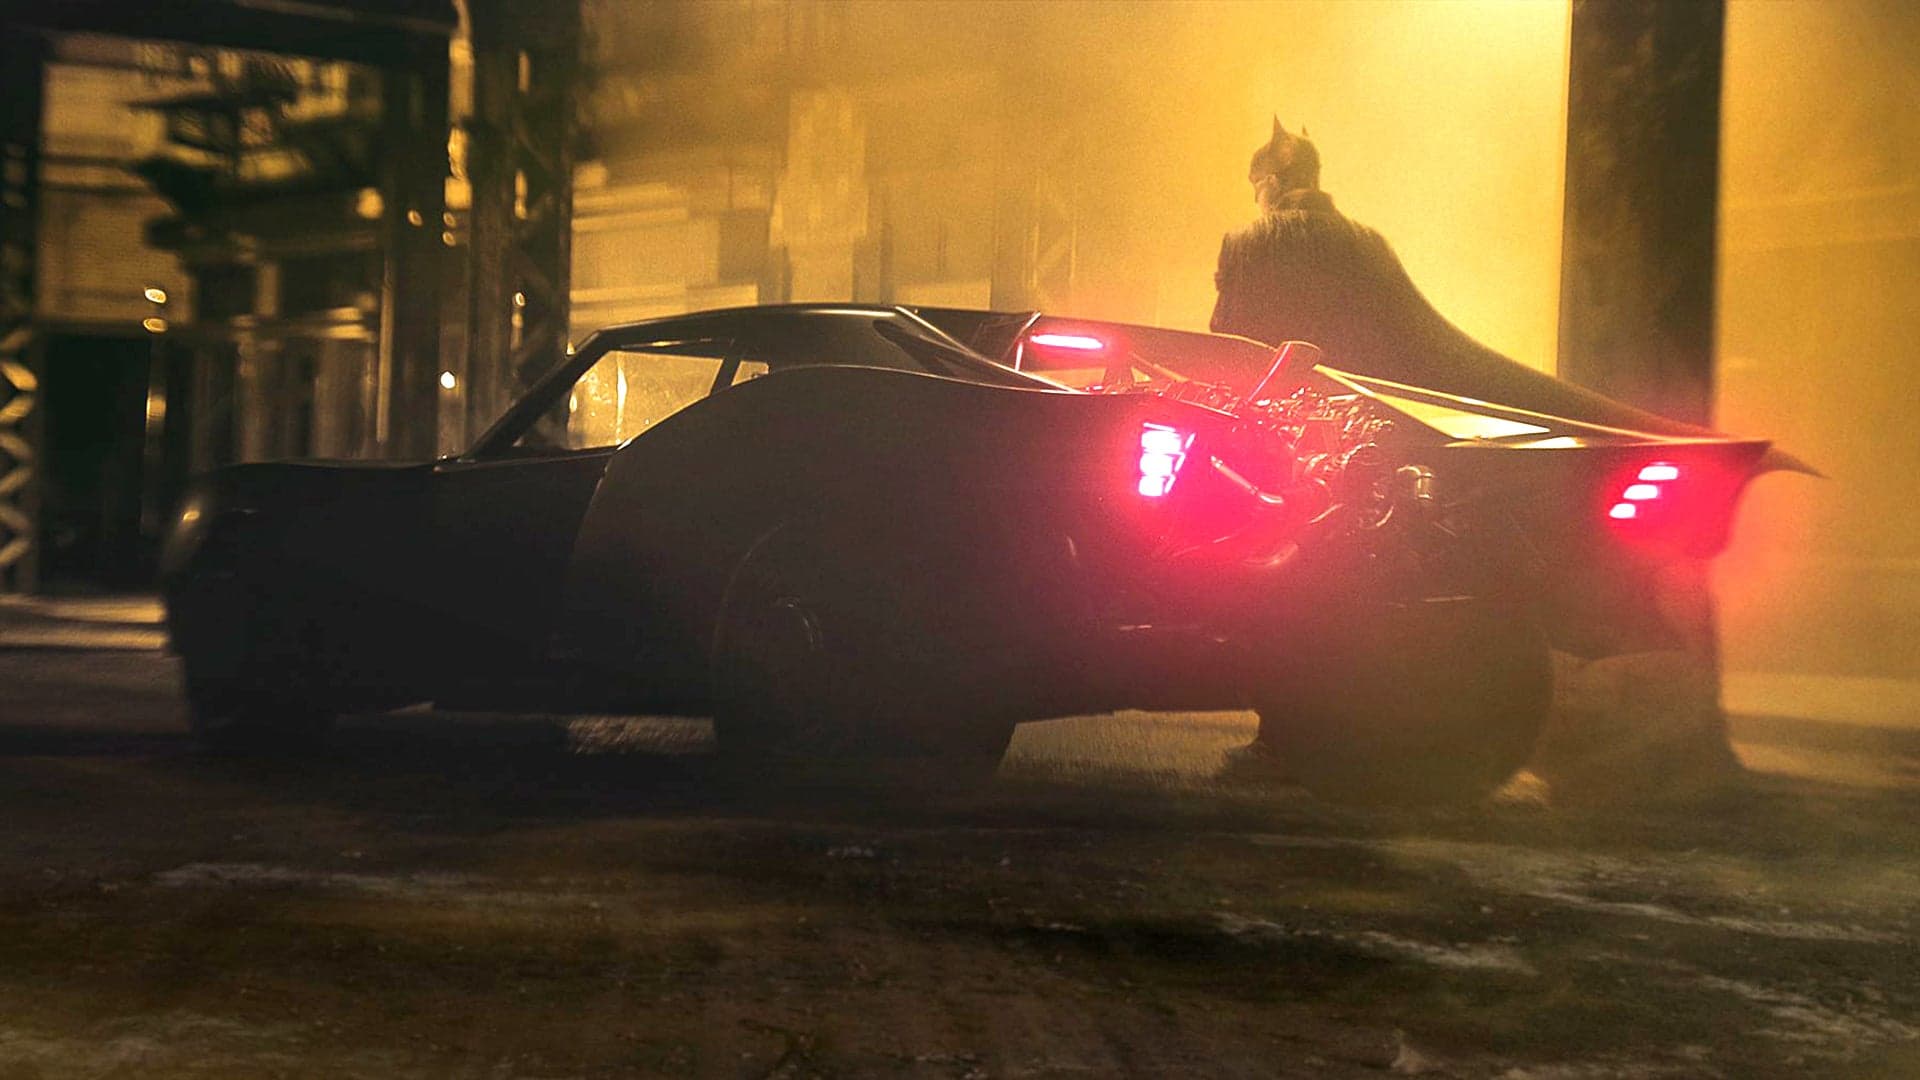 The Newest Batmobile Looks Like a Mid-Engine Muscle Car with a Twin-Turbo V8